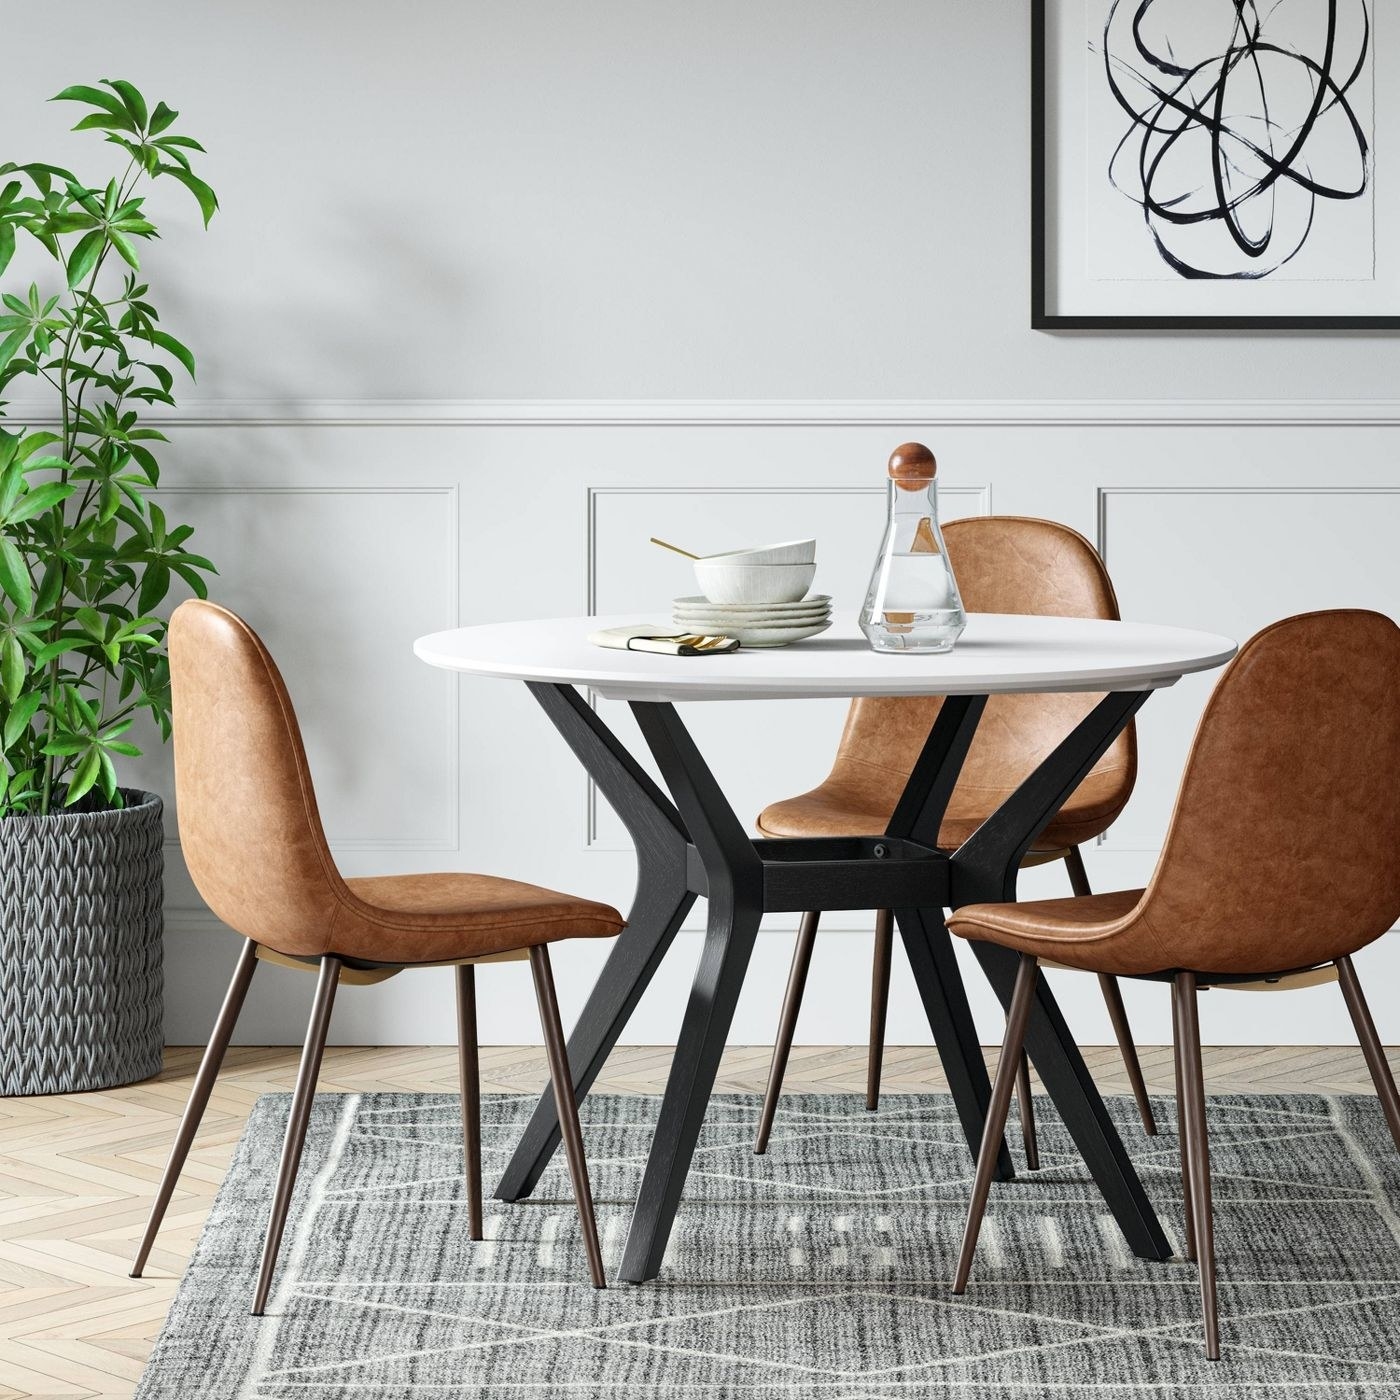 The white table with black legs in a dining area